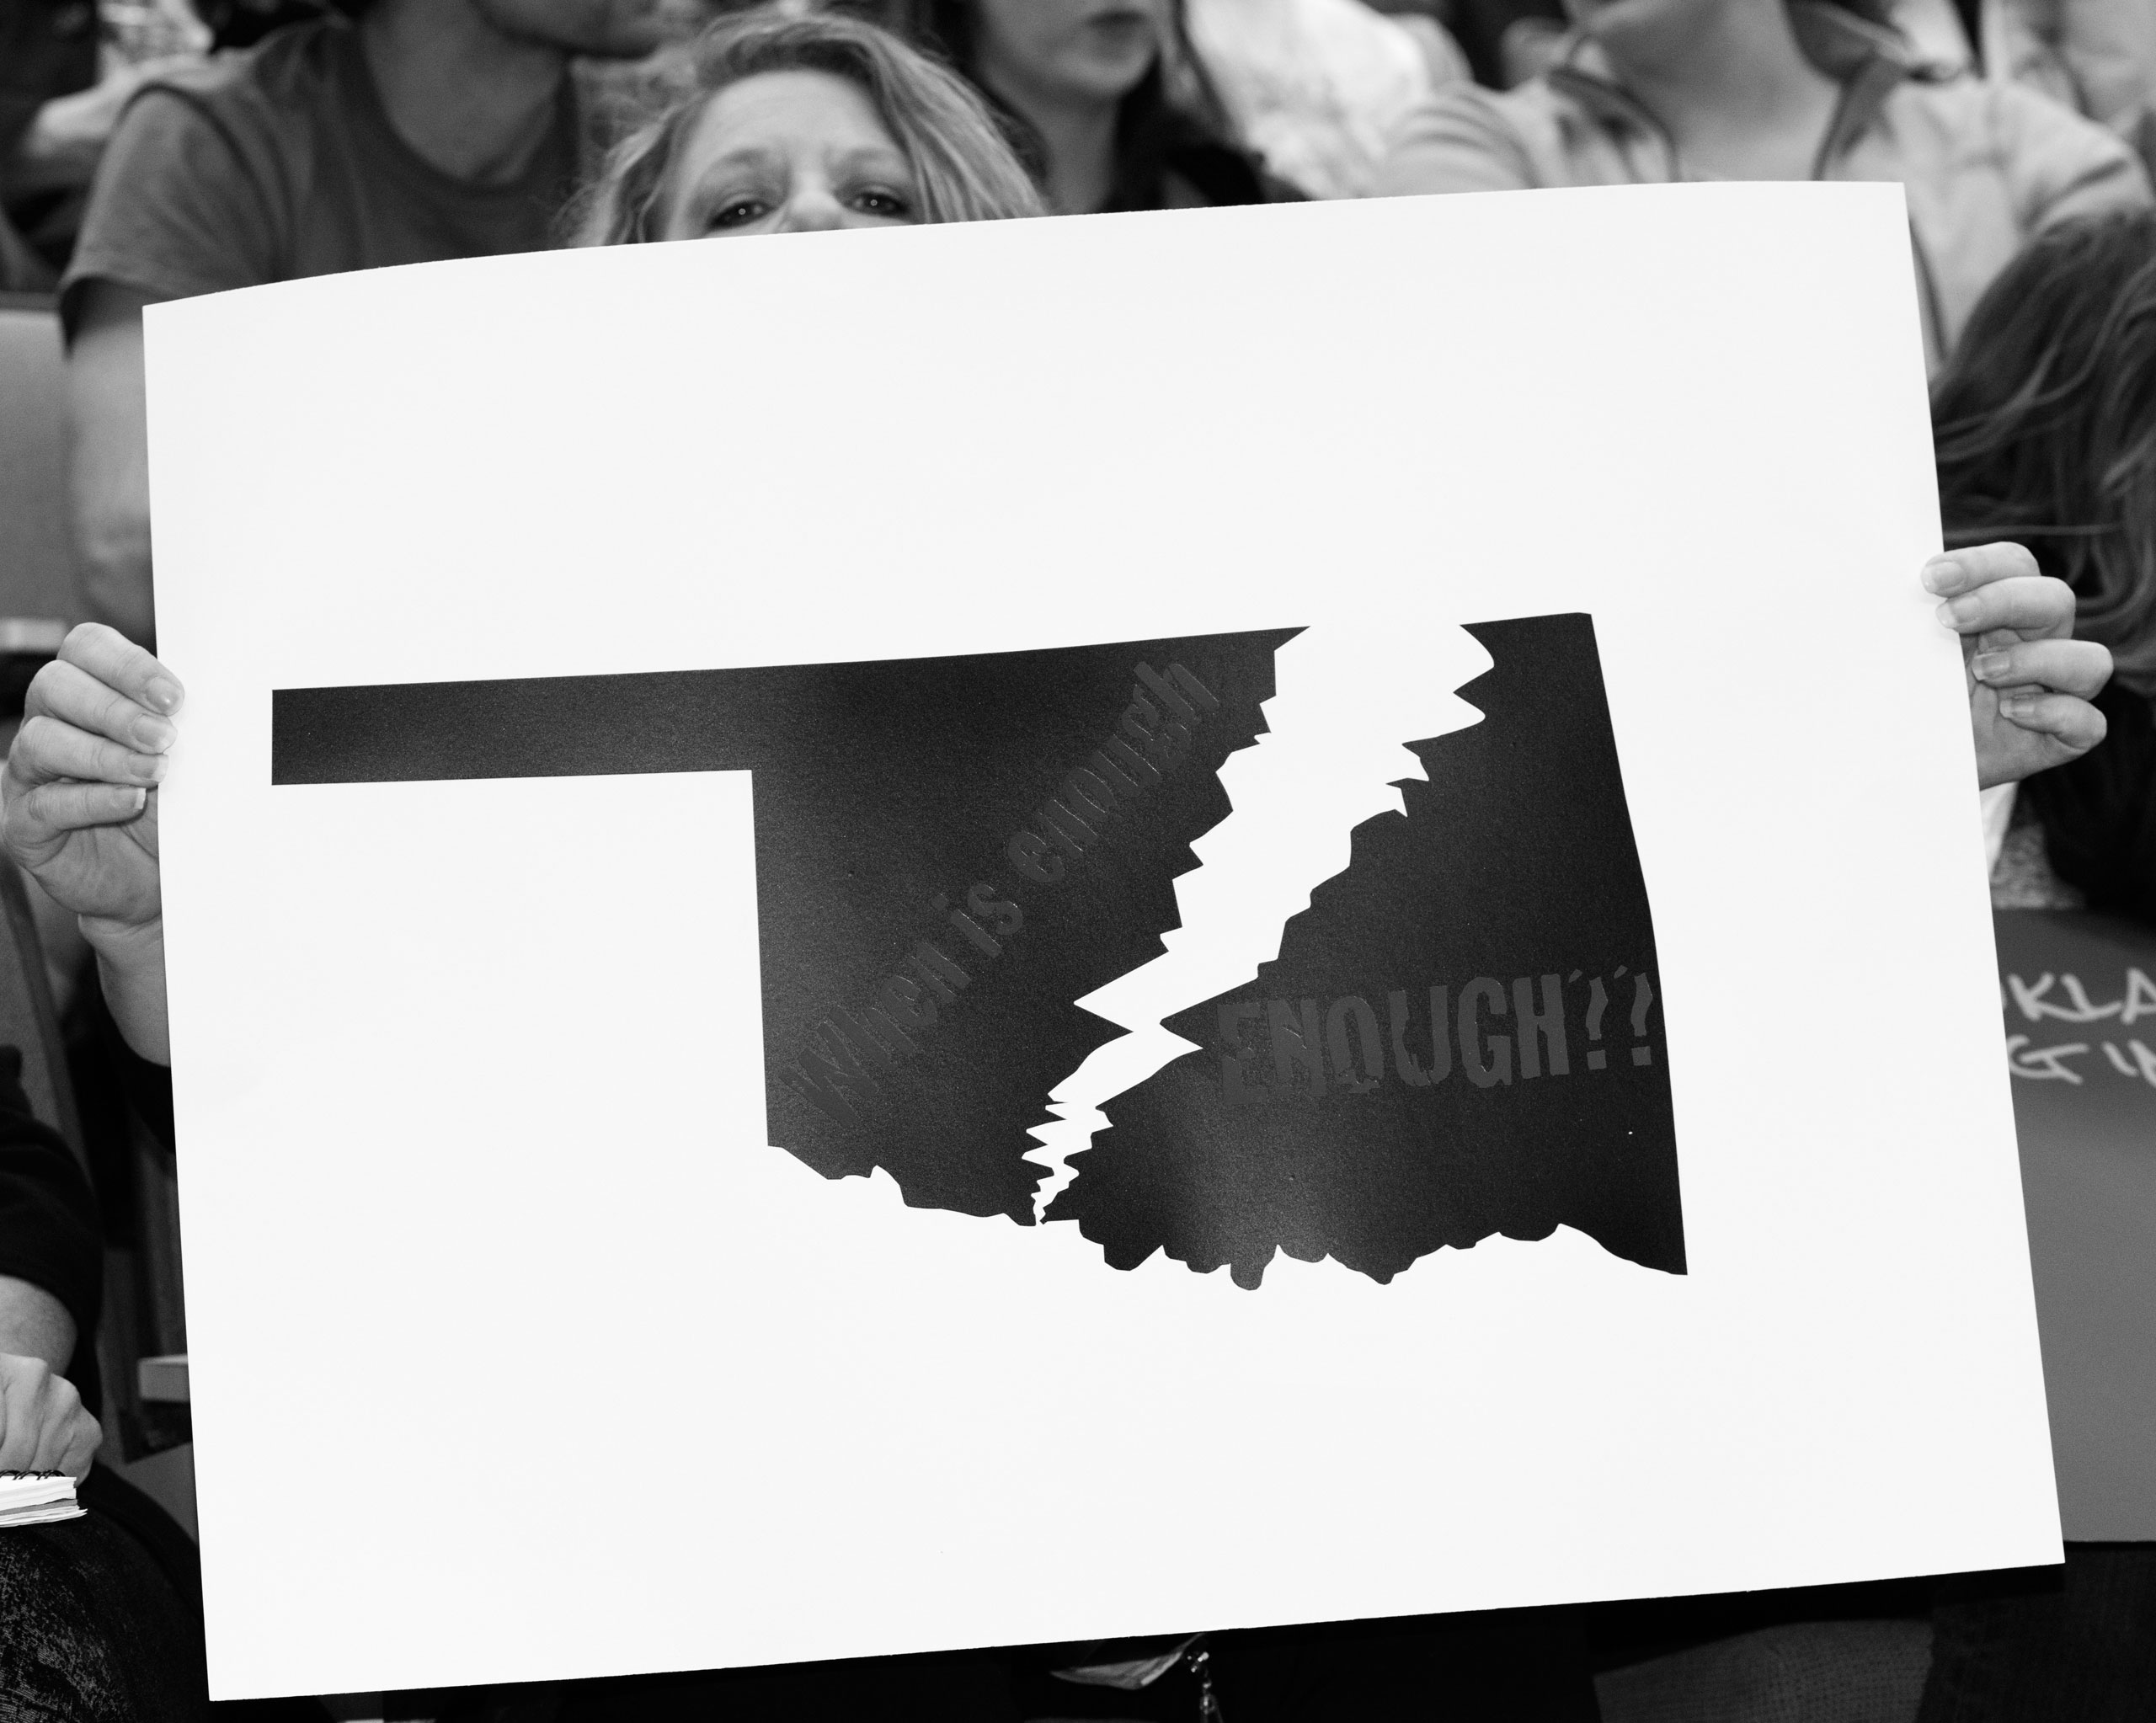 An attendee holds a protest sign at a public forum event hosted at the Univ. of Central Oklahoma, Edmond, OK